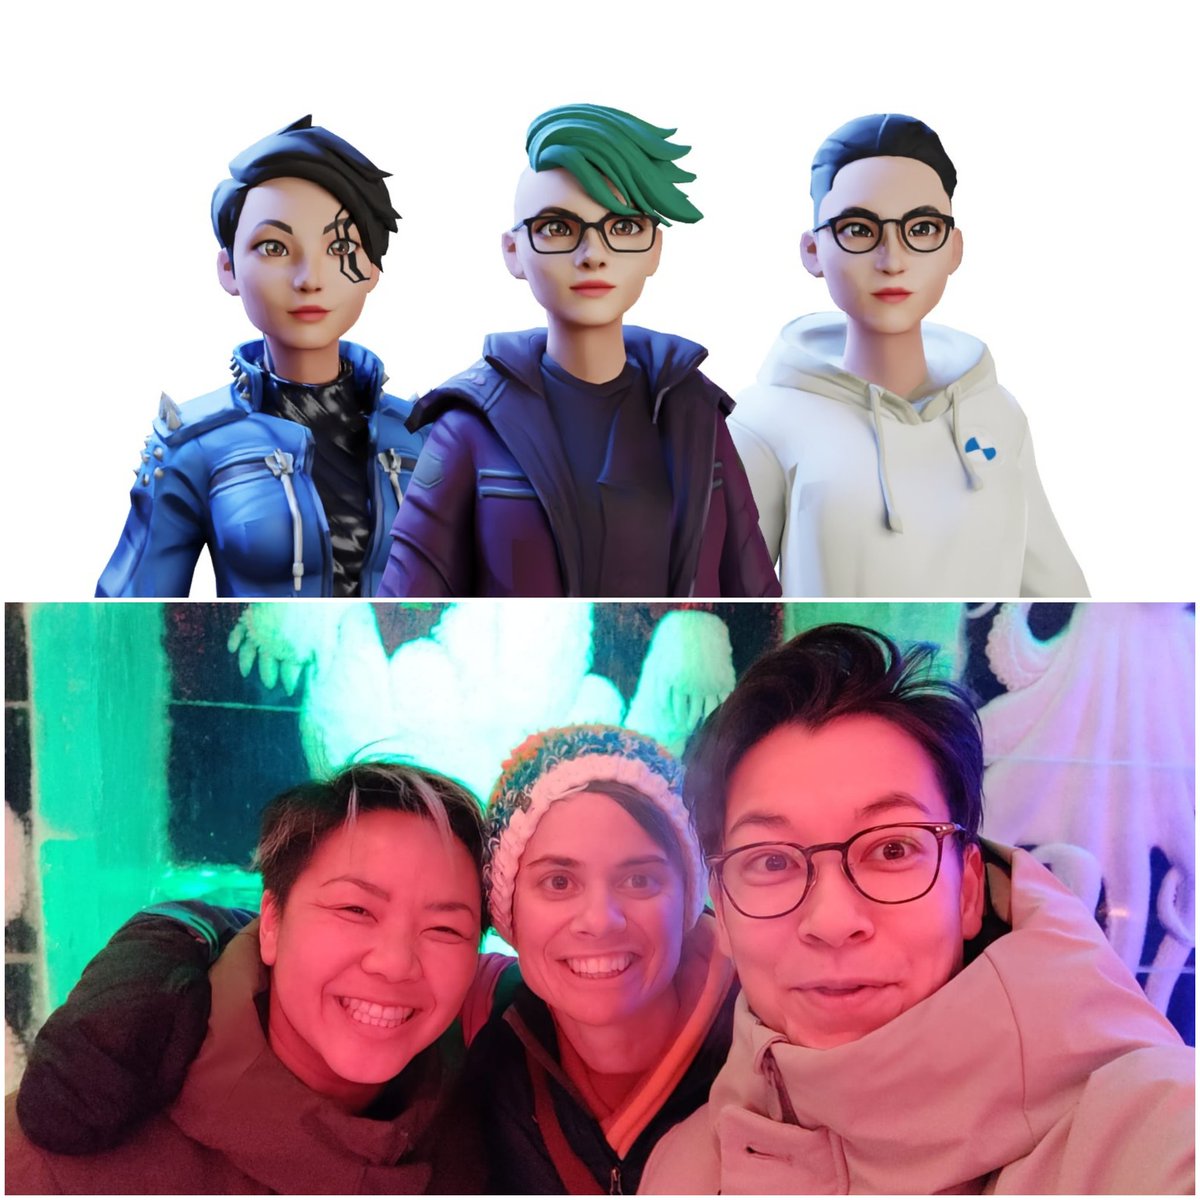 👋🏻 Hi fam! We're the three otters -- Tiff, Lou, and Aya. It's so great to meet you! We create digital worlds to give our physical one a fighting chance. 🧵

 #virtualrealityworld #virtualrealitygames #videogames #spatial #readyme #girlsthatcode #girlswhogame